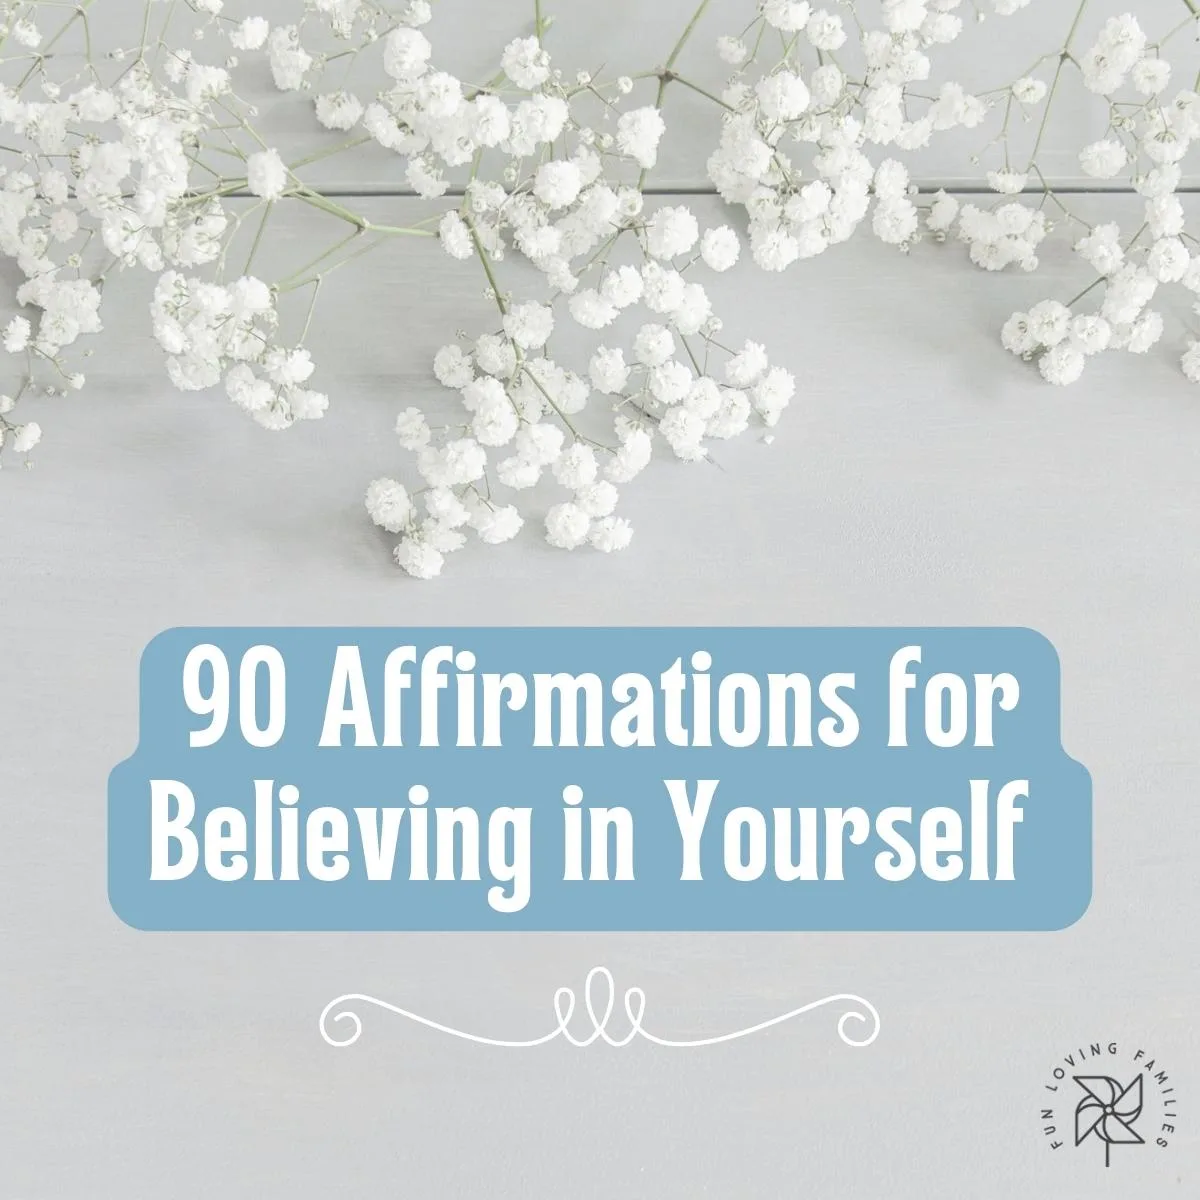 90 Affirmations for Believing in Yourself and Cultivating Self-Worth